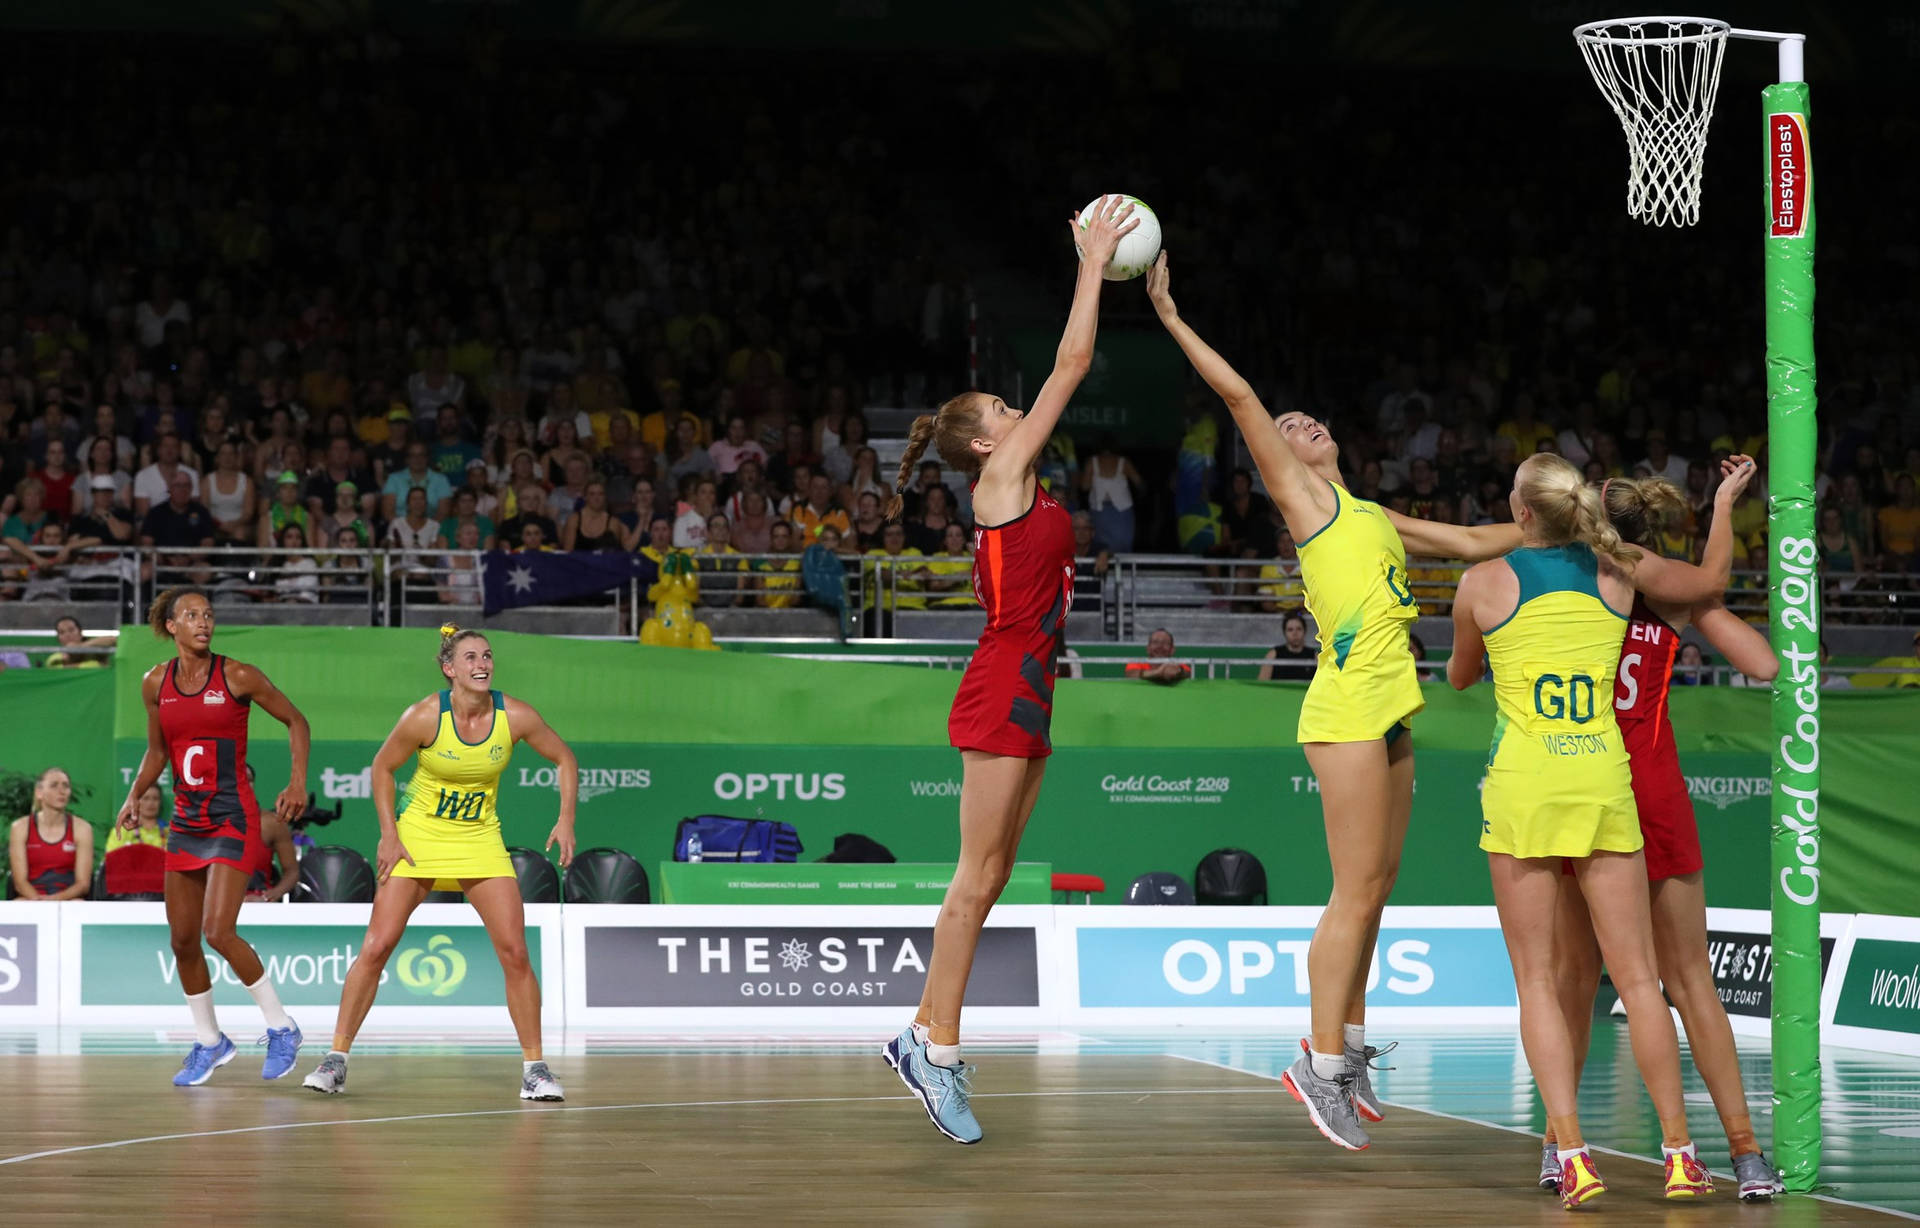 Netball Pictures Wallpaper